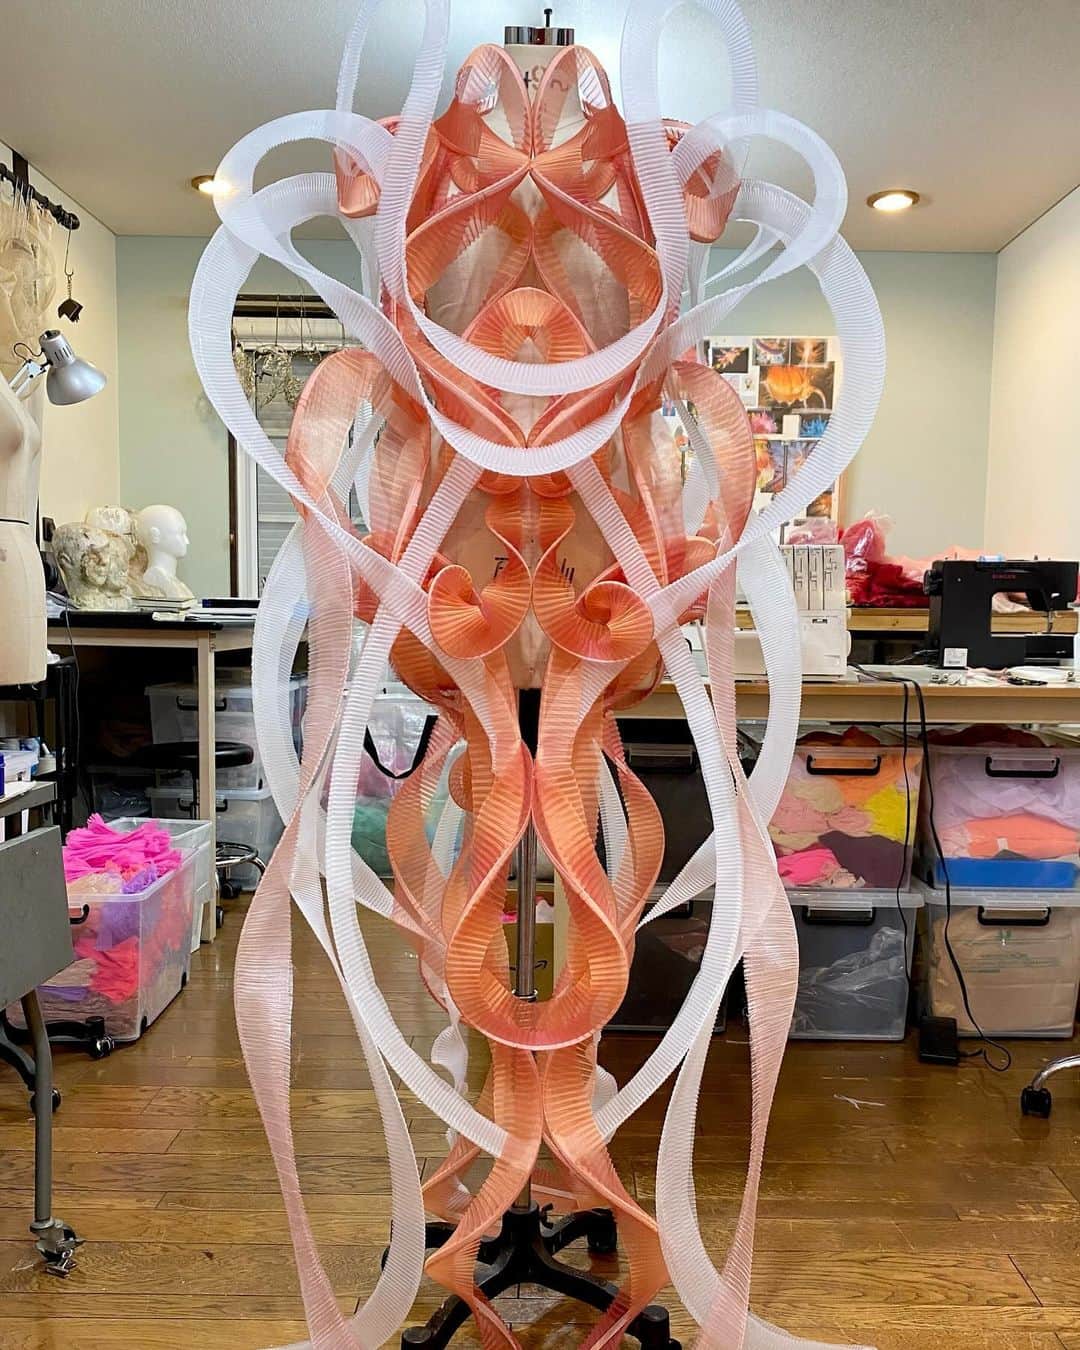 ARAKI SHIROのインスタグラム：「-spiral costume making/coral×white ver.- The custom-made costume would be all constructed with the spiral pleated parts. I am really interested in the process of controlling spiral details into organic shapes.  #ARAKISHIRO  #emergingdesigner #upnextdesigner #emergingfashion #conceptualfashion #upcomingdesigner #sculptural」